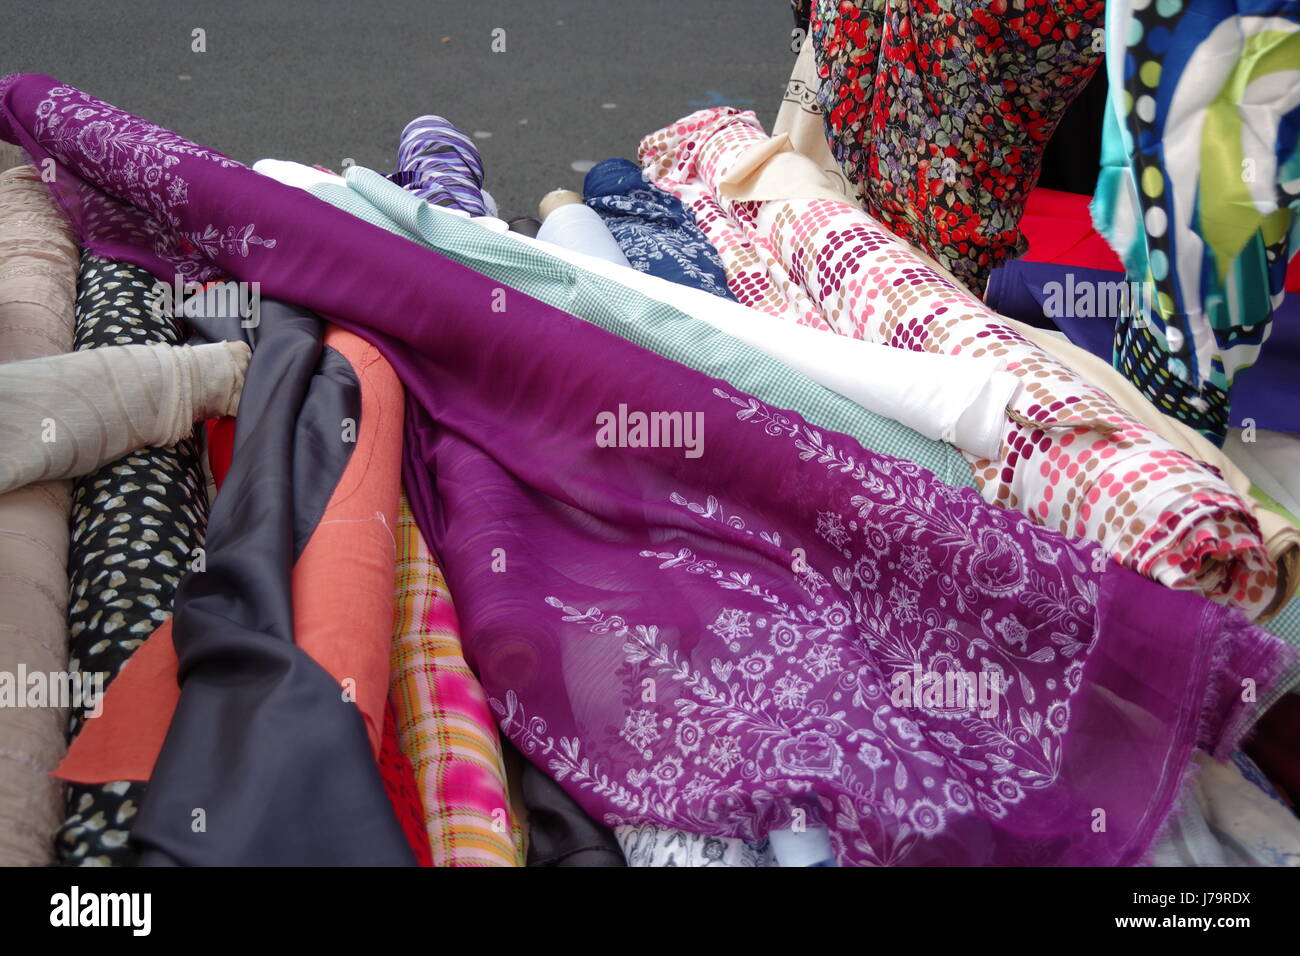 Rolls of colourful headscarf and sari material for sale on a fabric stall at Chalton Street Market in London UK Stock Photo